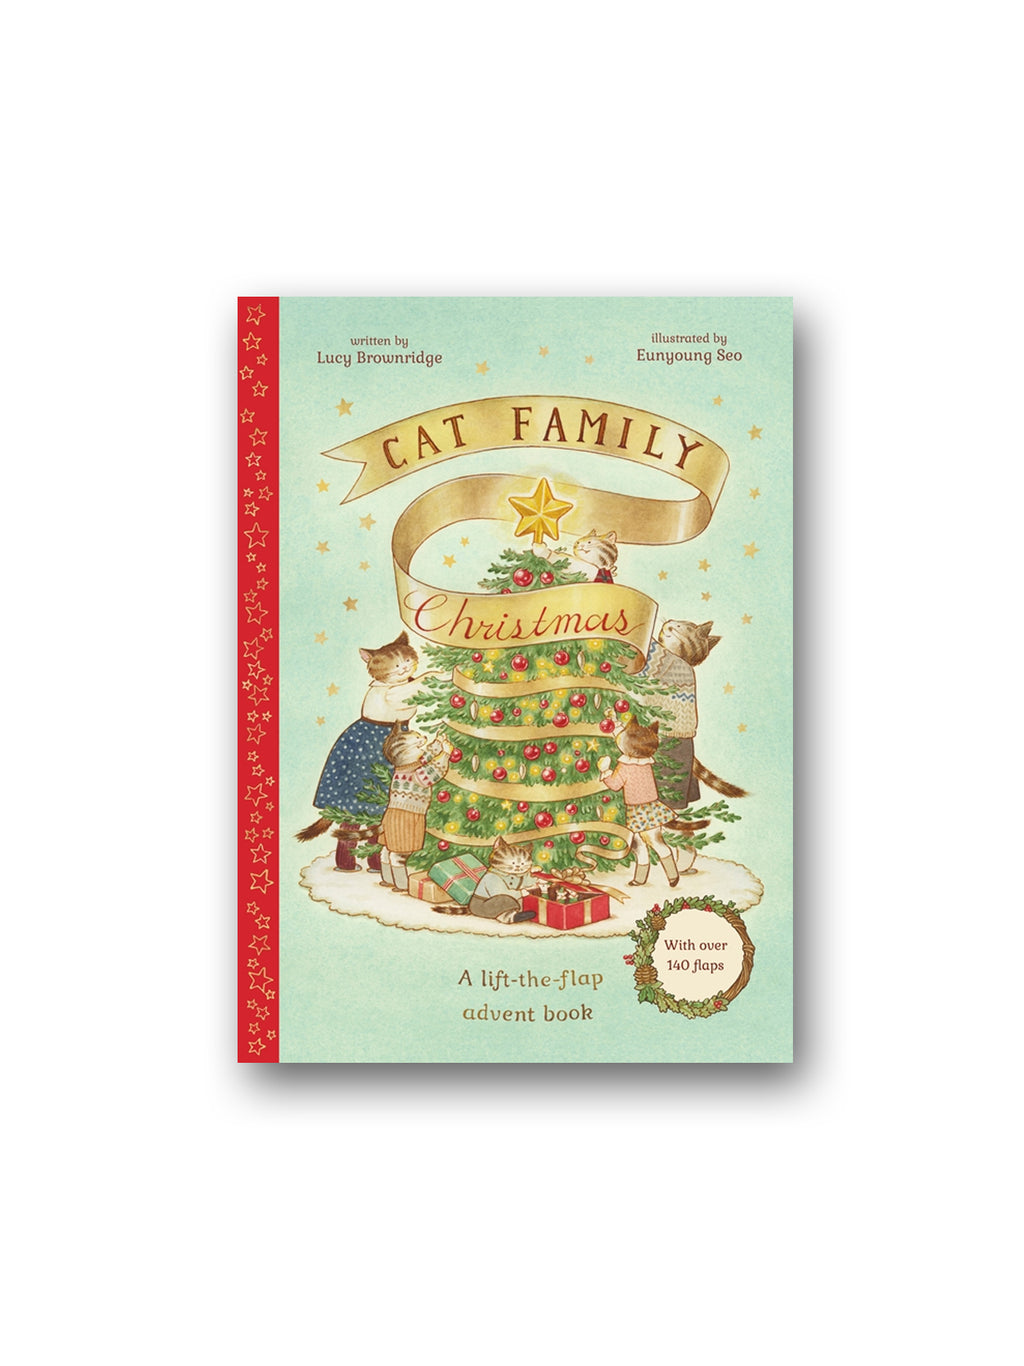 Cat Family Christmas : An Advent Lift-the-Flap Book